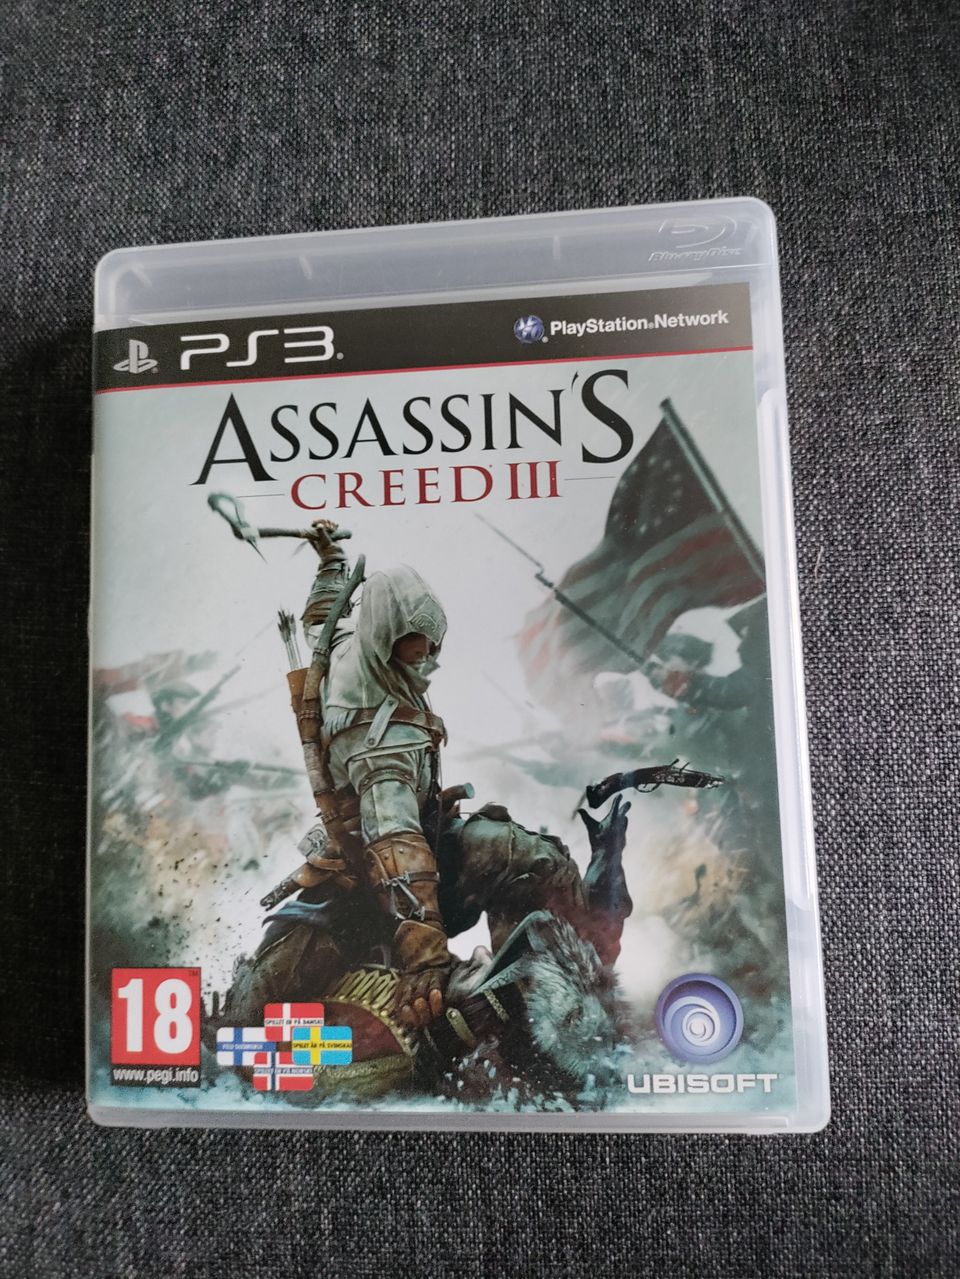 PS3 Assassin's Creed 3